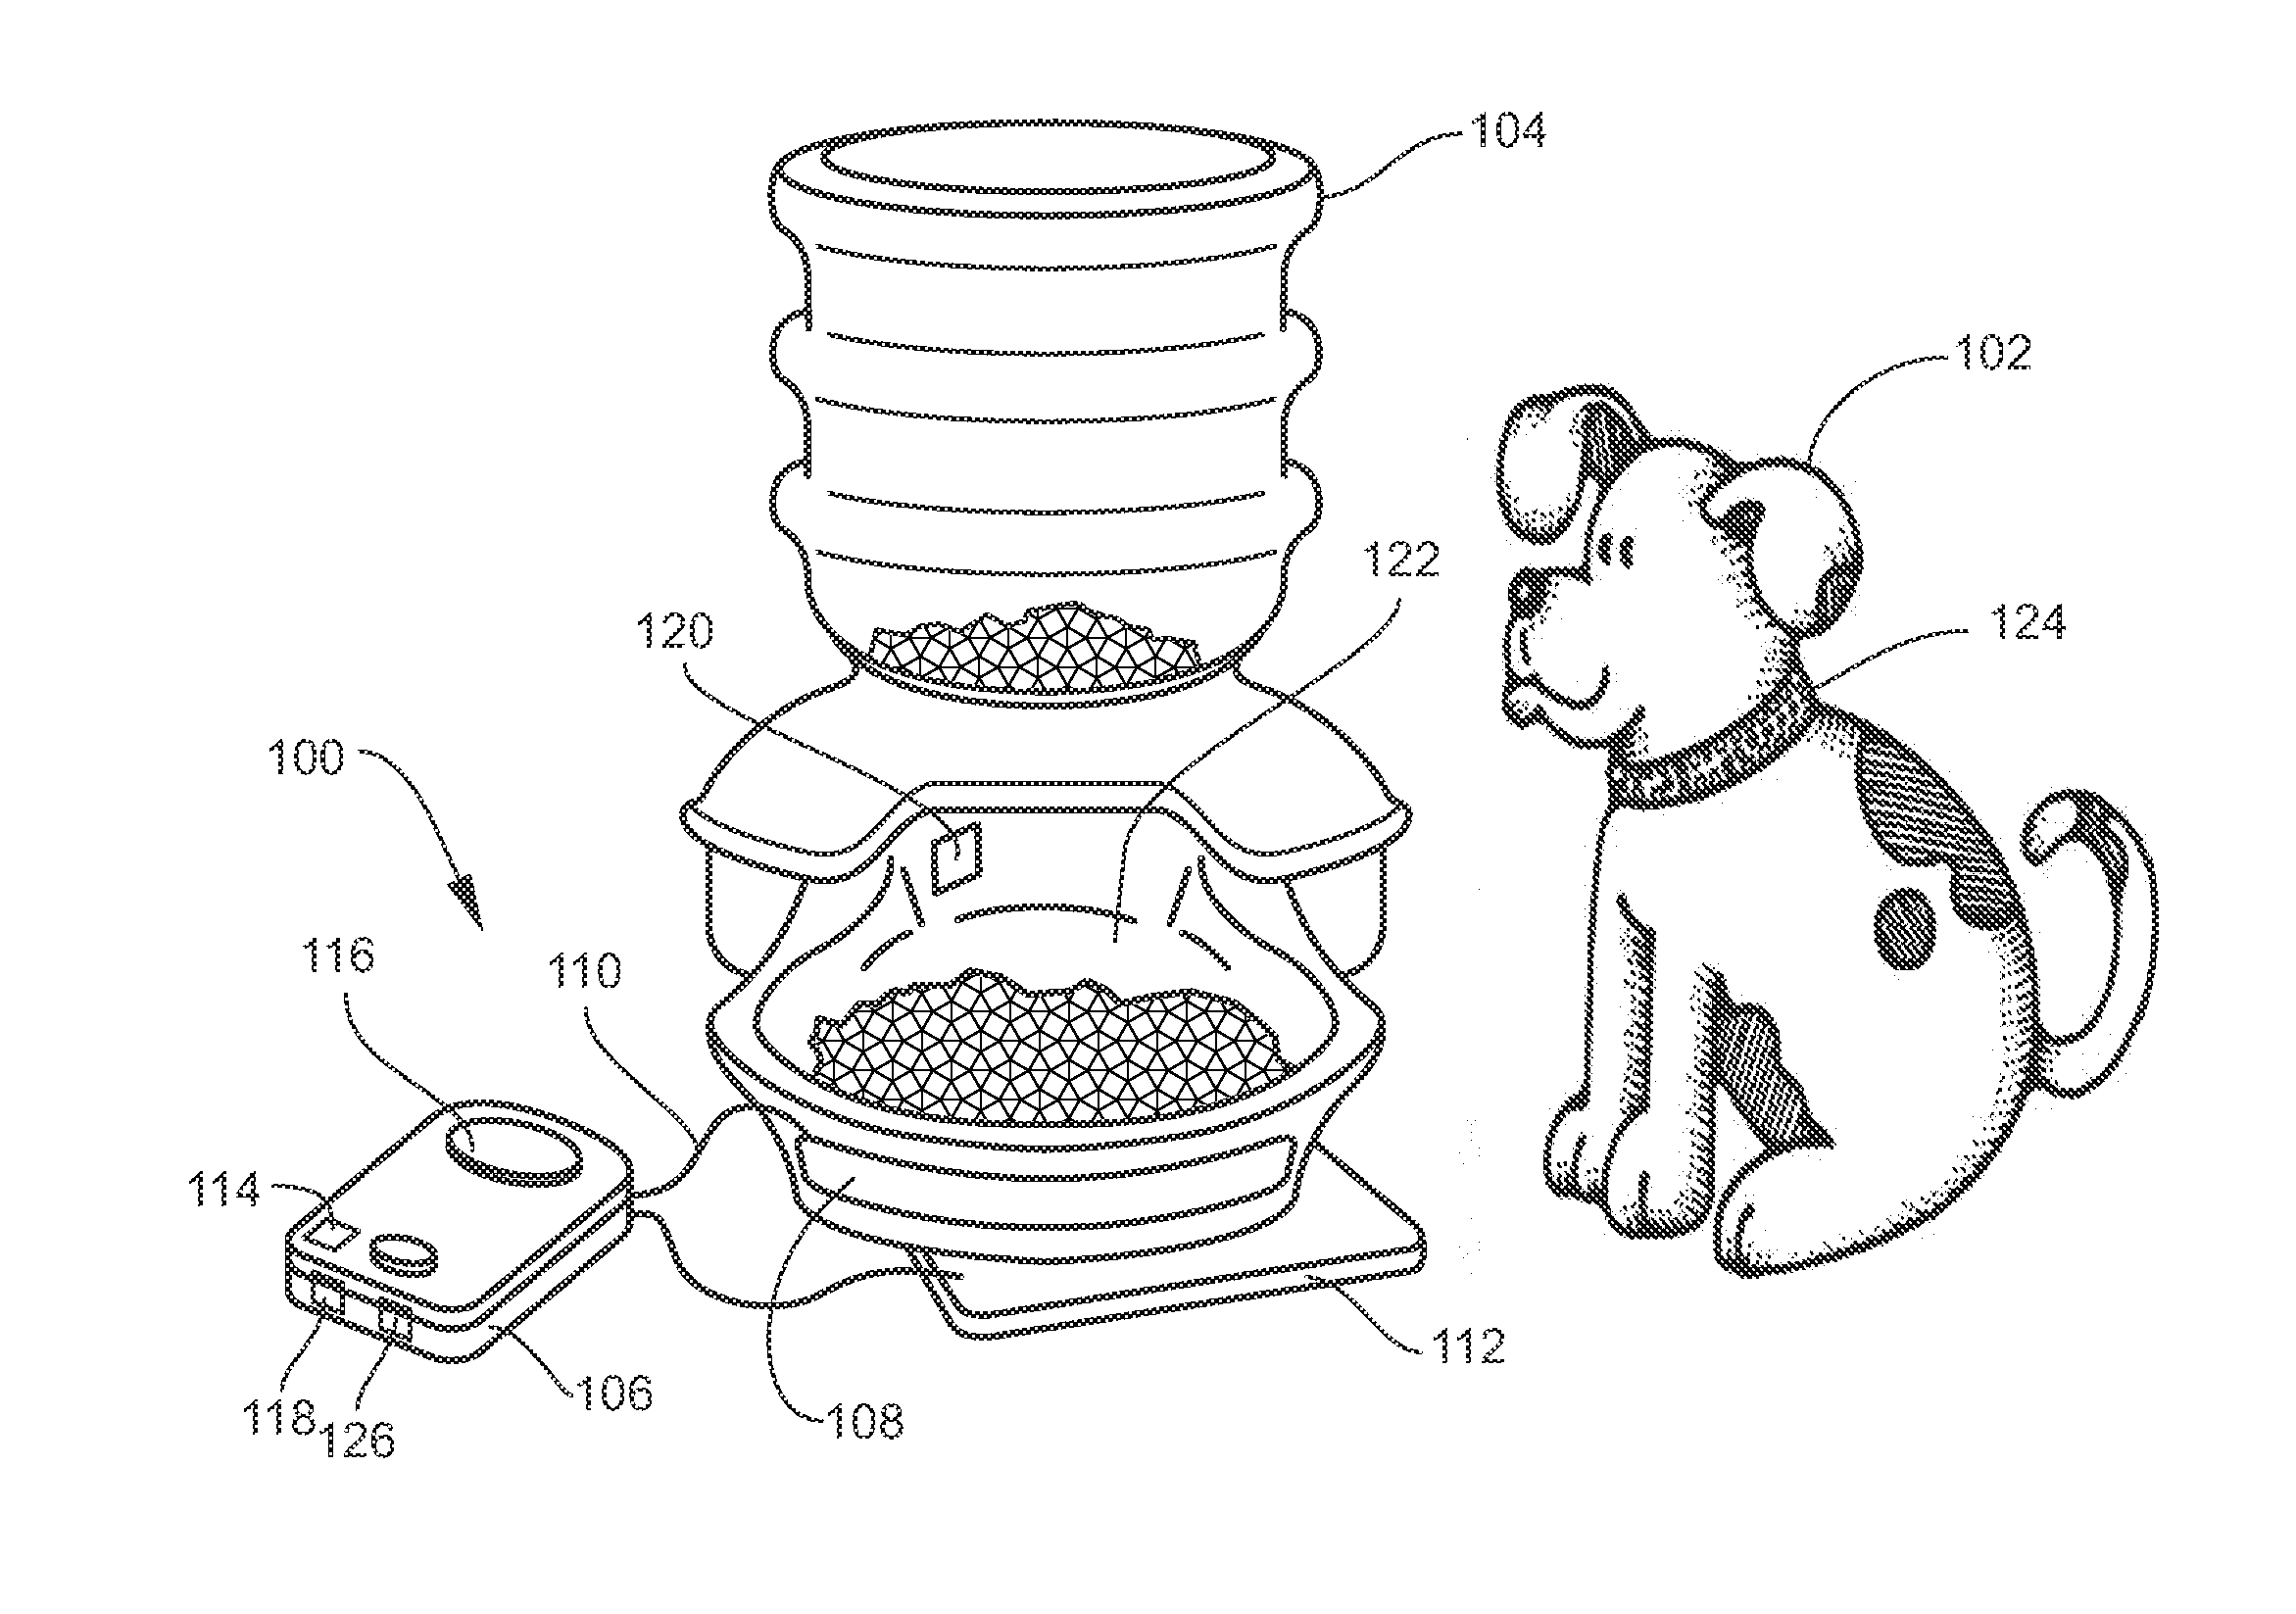 Systems and methods for monitoring and controlling animal behavior